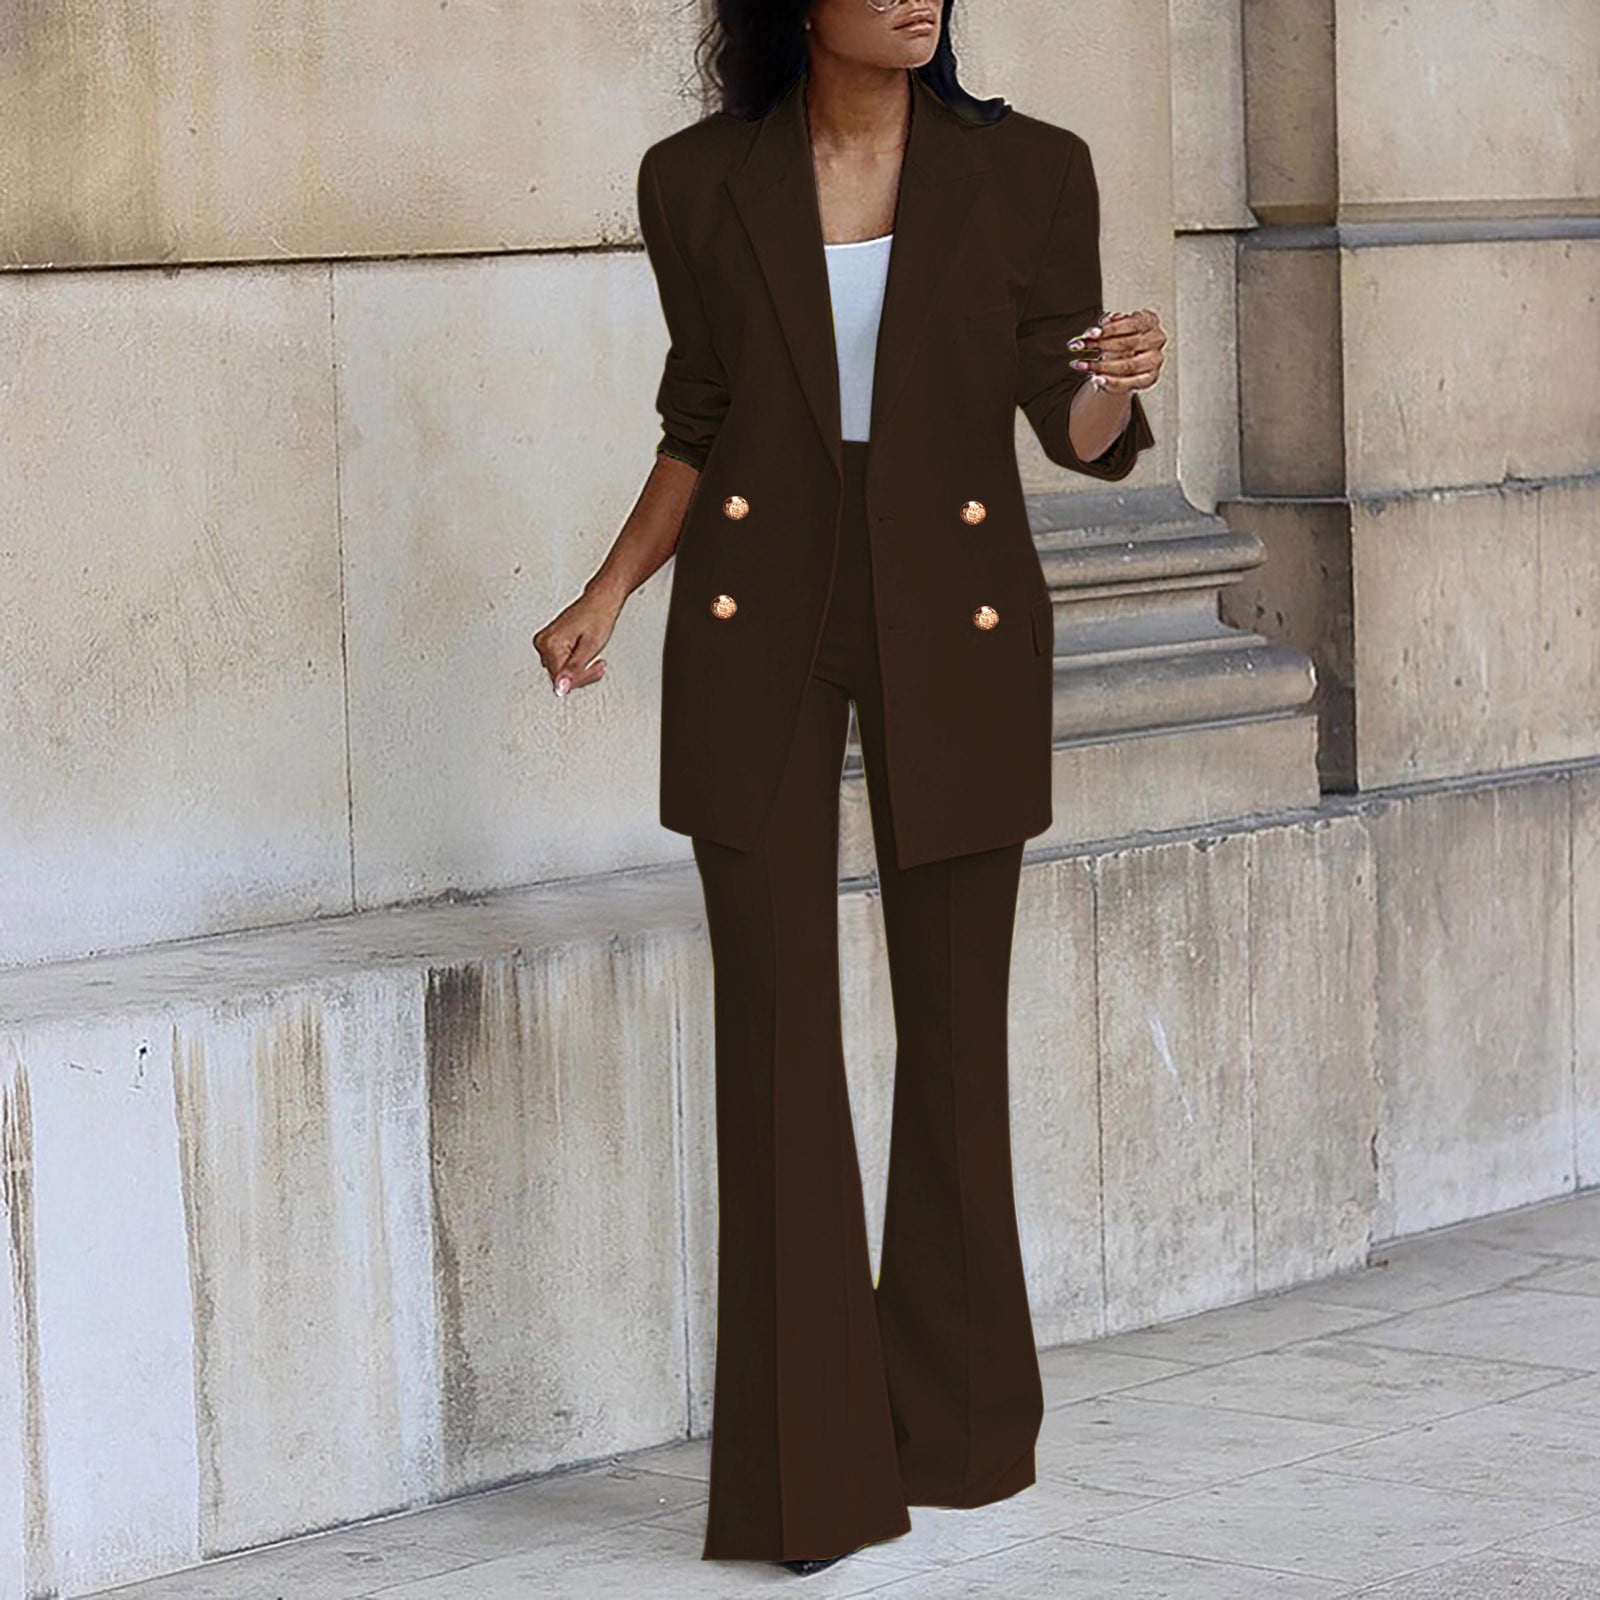 Leesechin Womens Blazer Long Sleeve Solid Suit Pants Casual